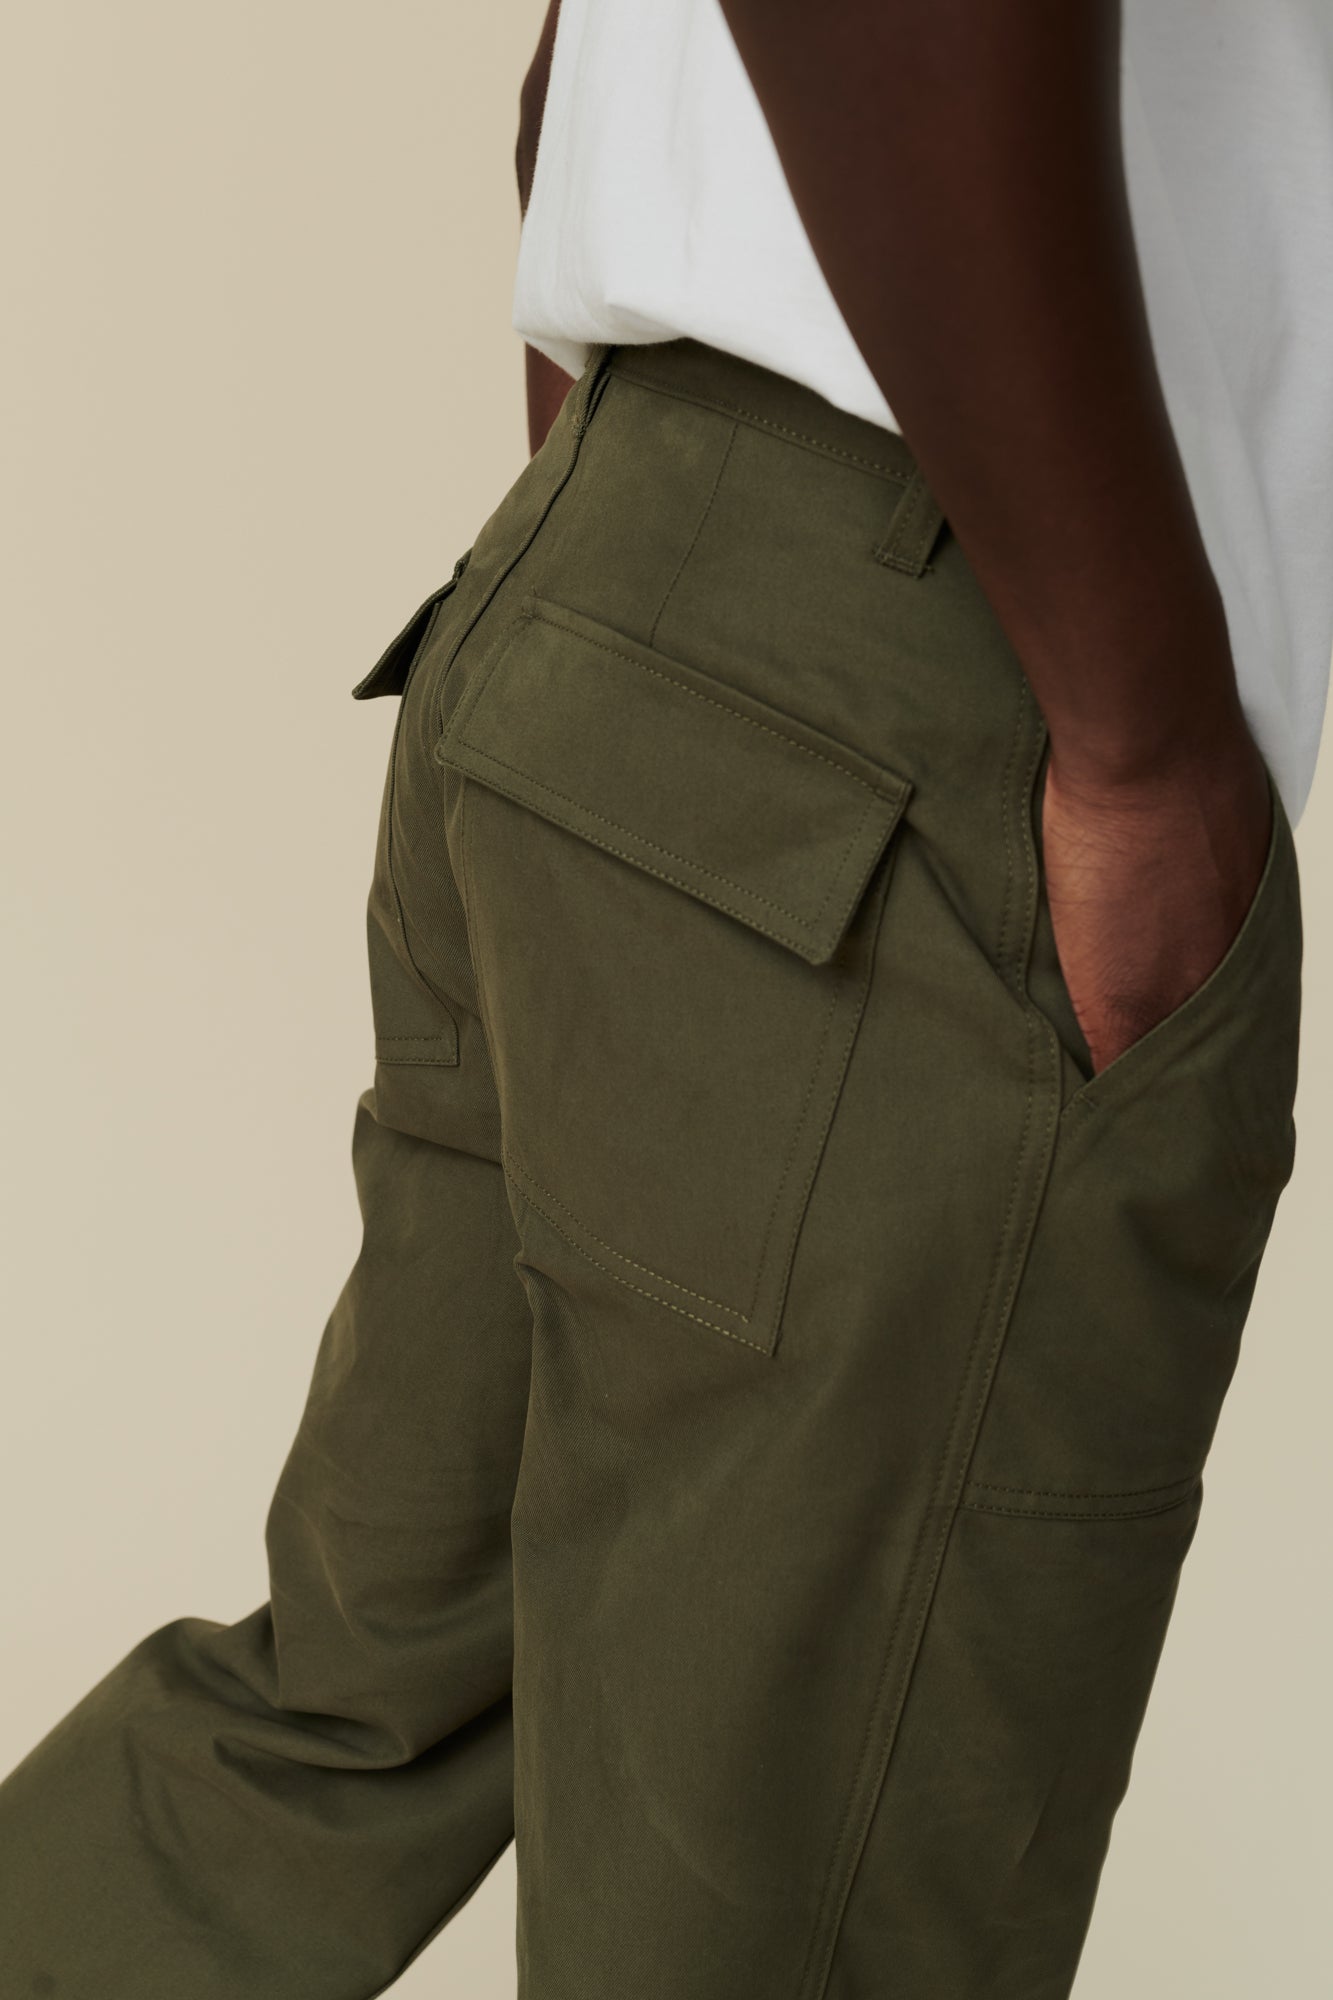 ACU Combat Uniform Pants, Army Trousers with Velcro Pockets